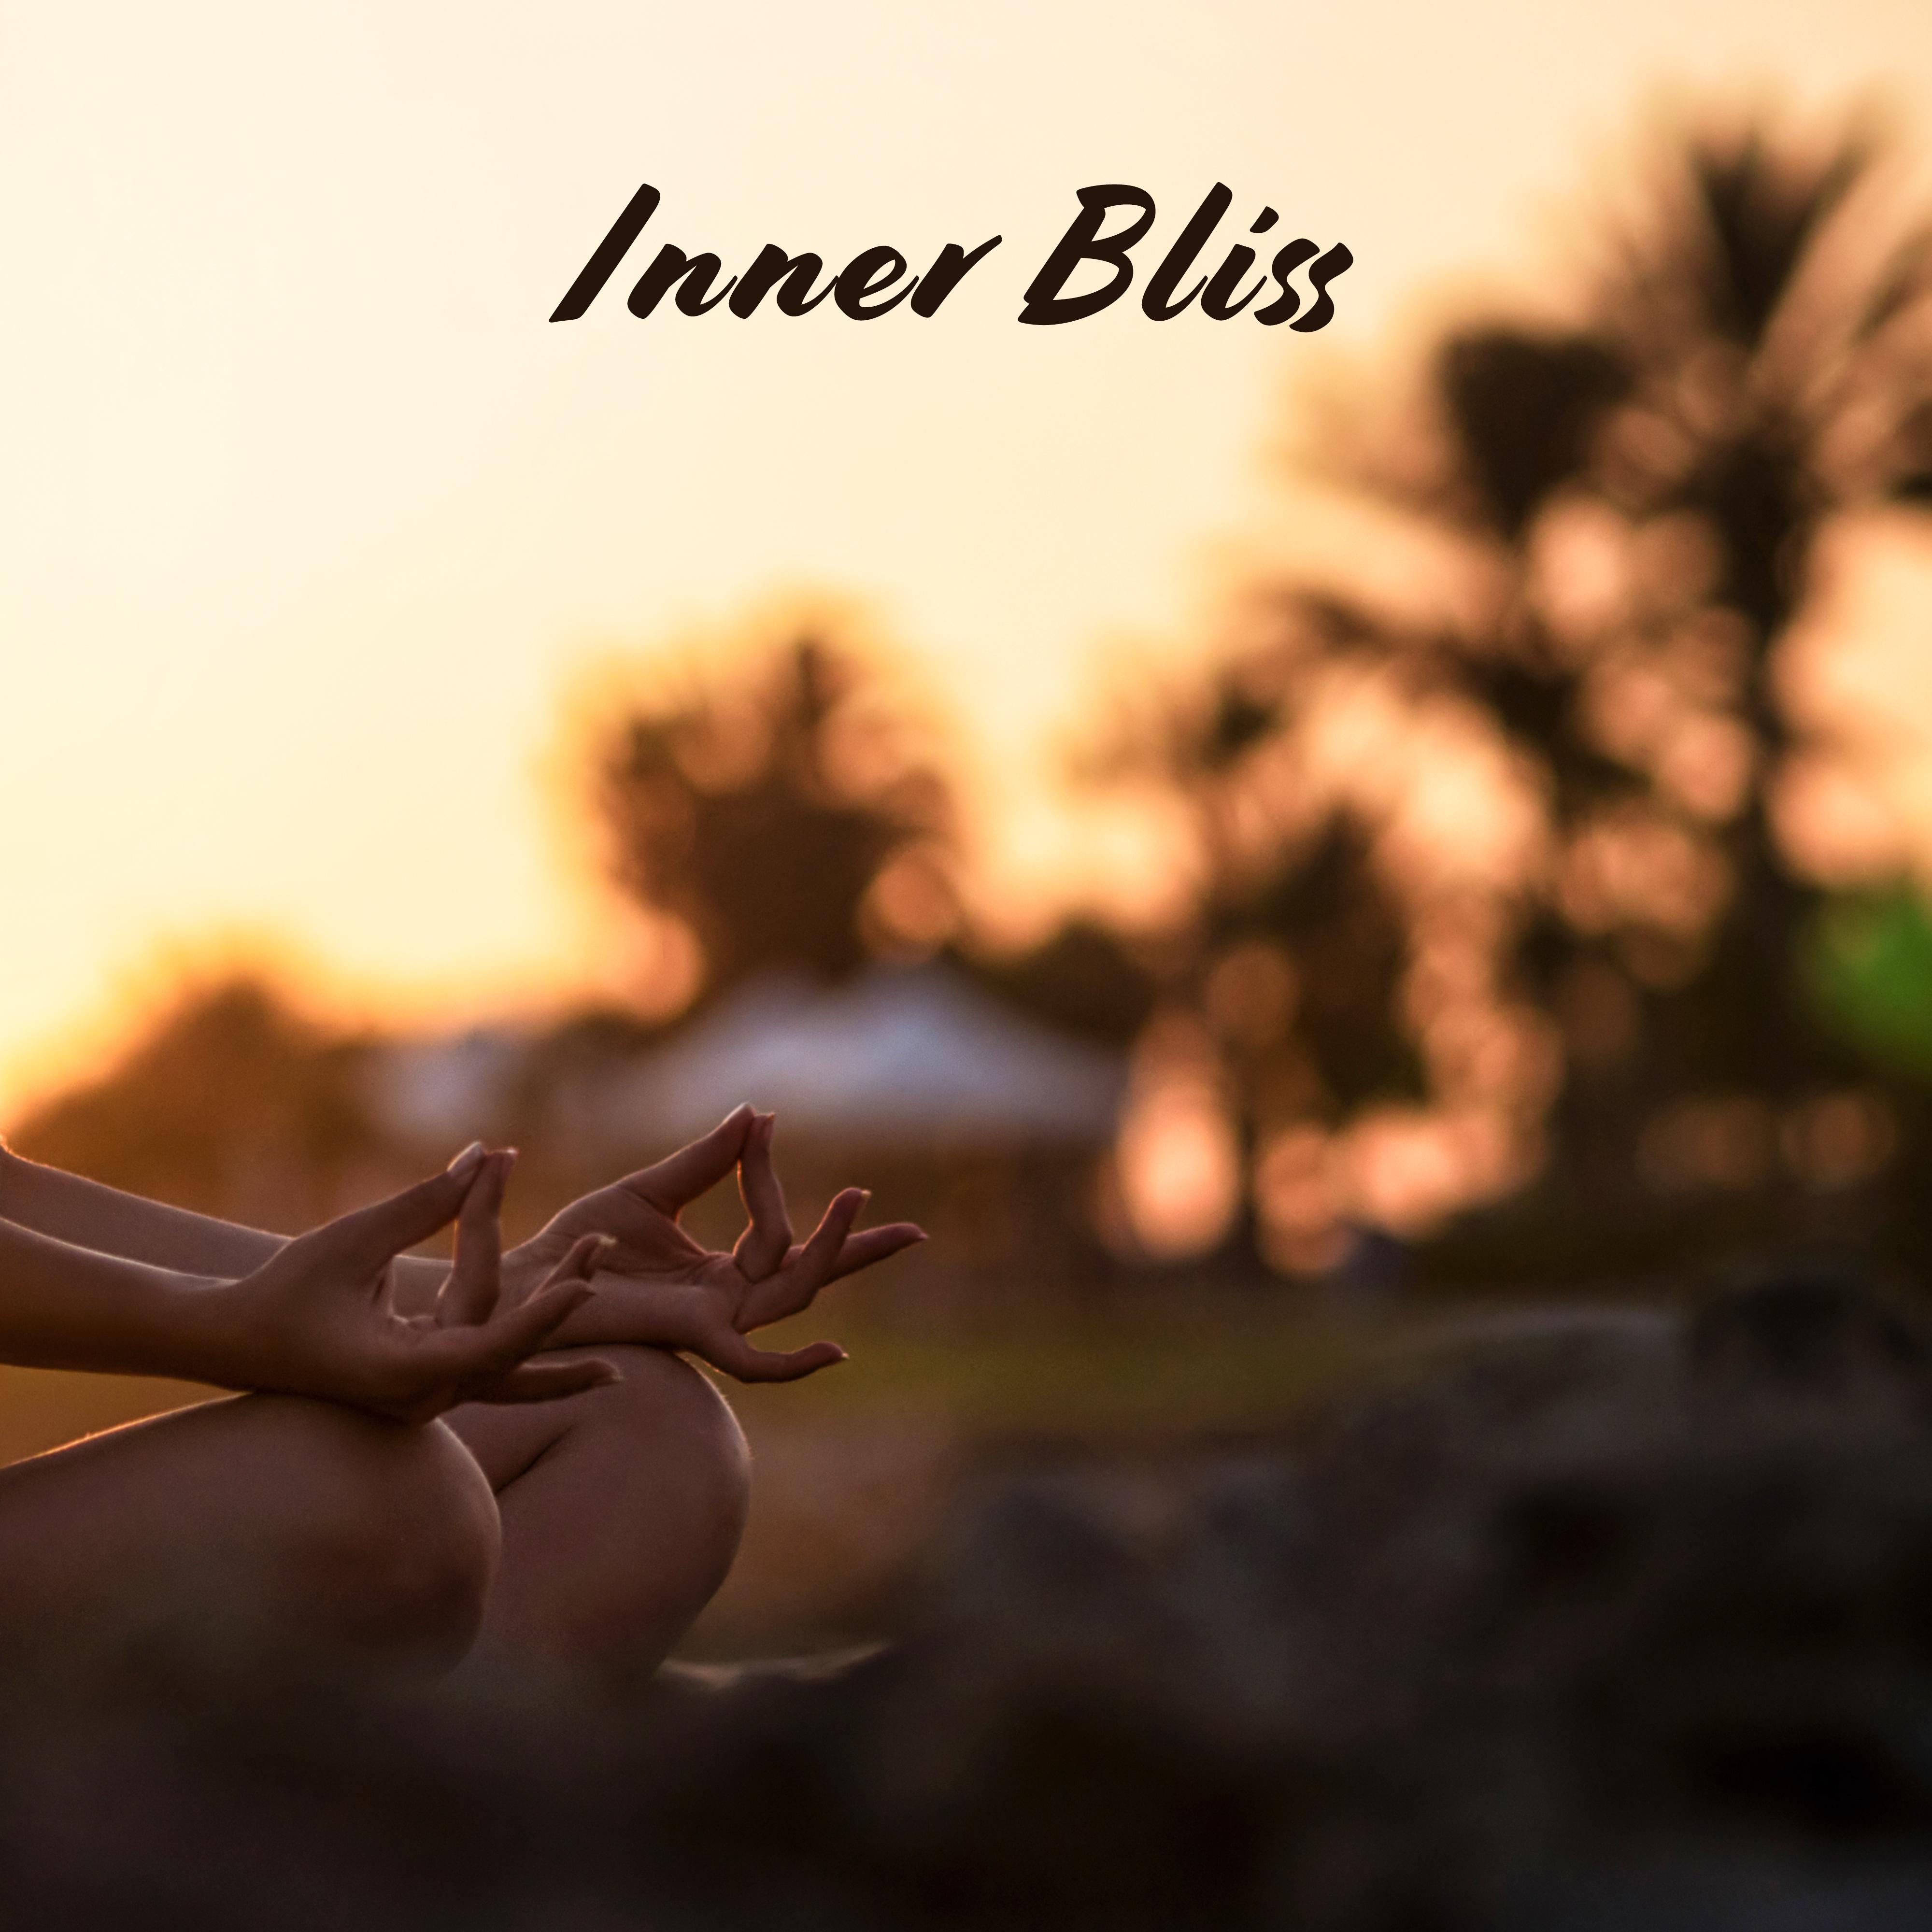 Inner Bliss: 15 Songs for Meditation, Helpful in Achieving Inner Happiness, Peace, Balance and Love